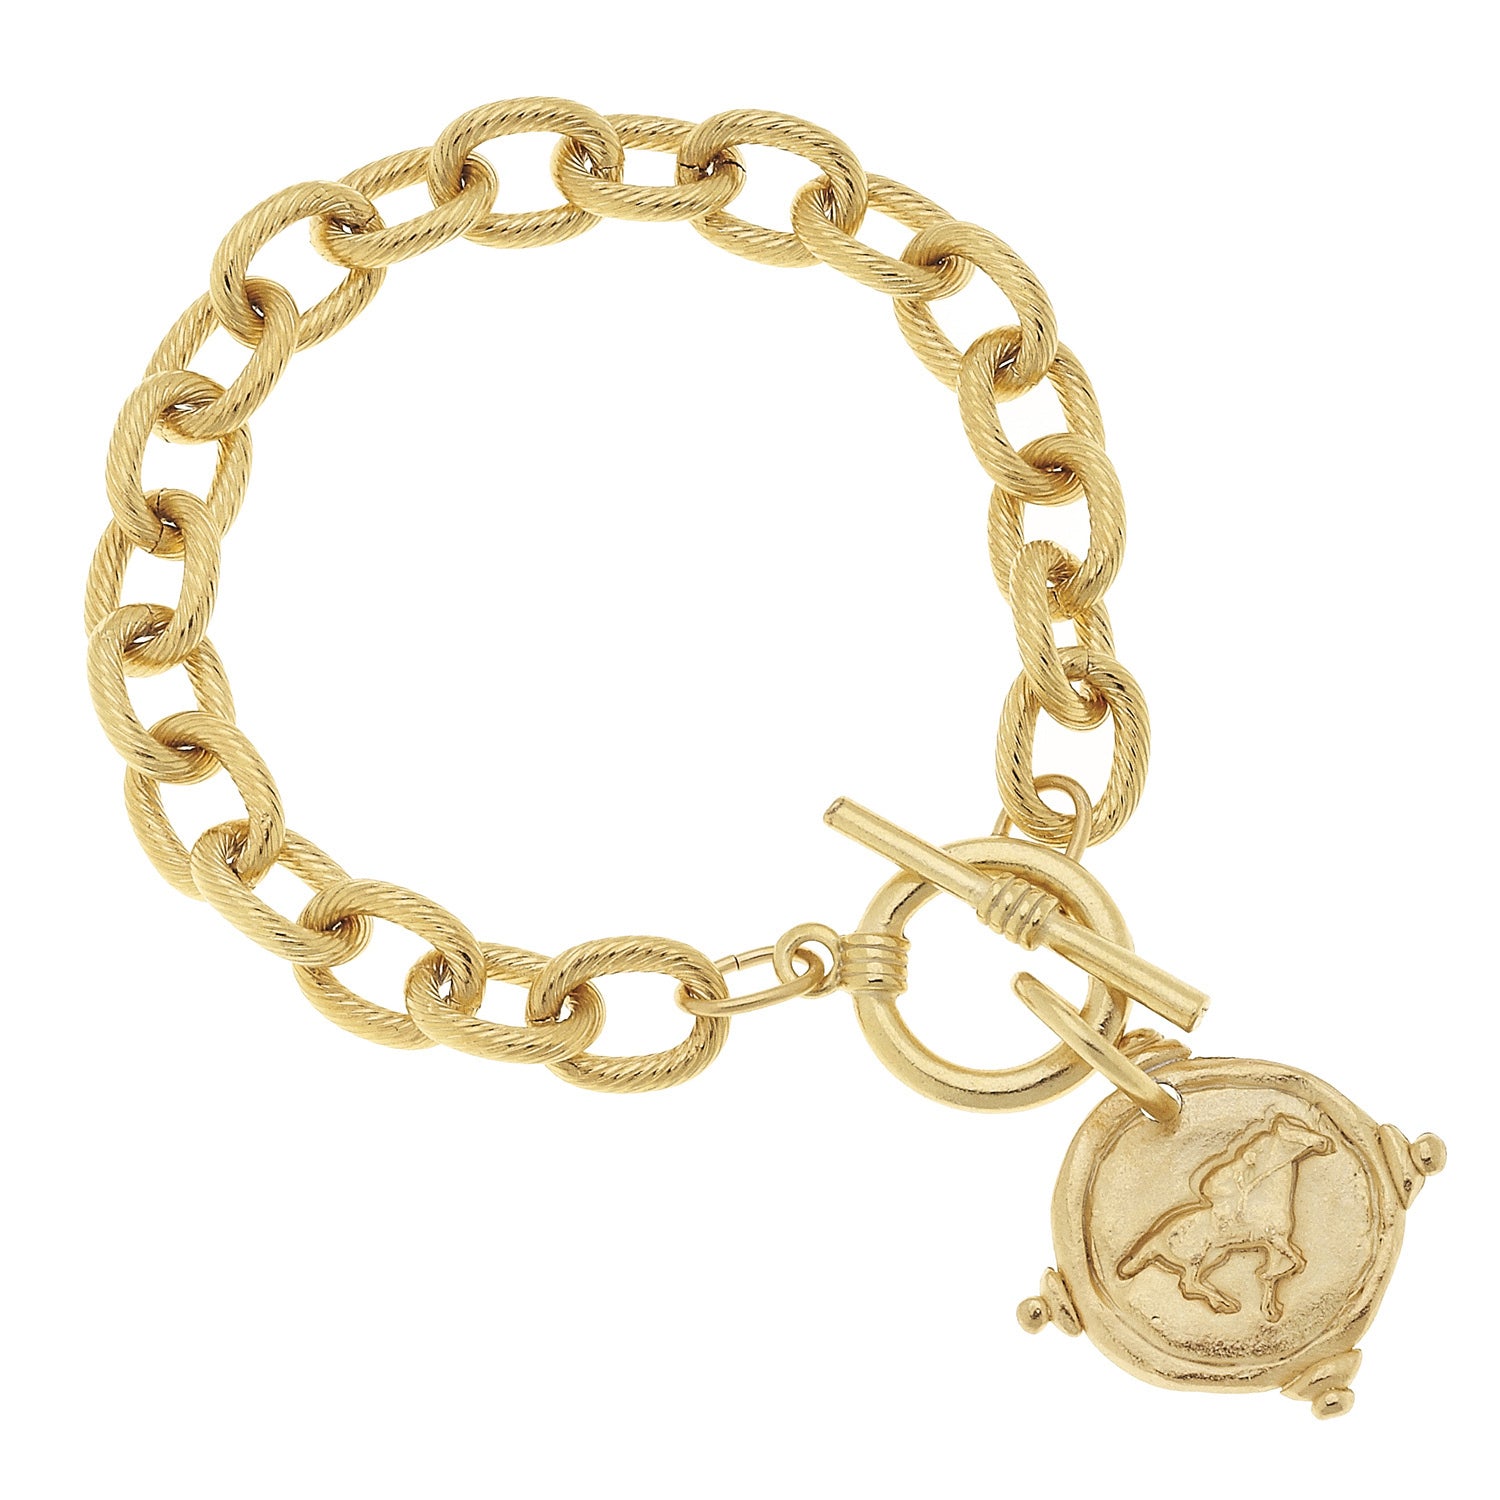 Susan Shaw Jewelry Racehorse Bracelet, Horse Charm in Gold